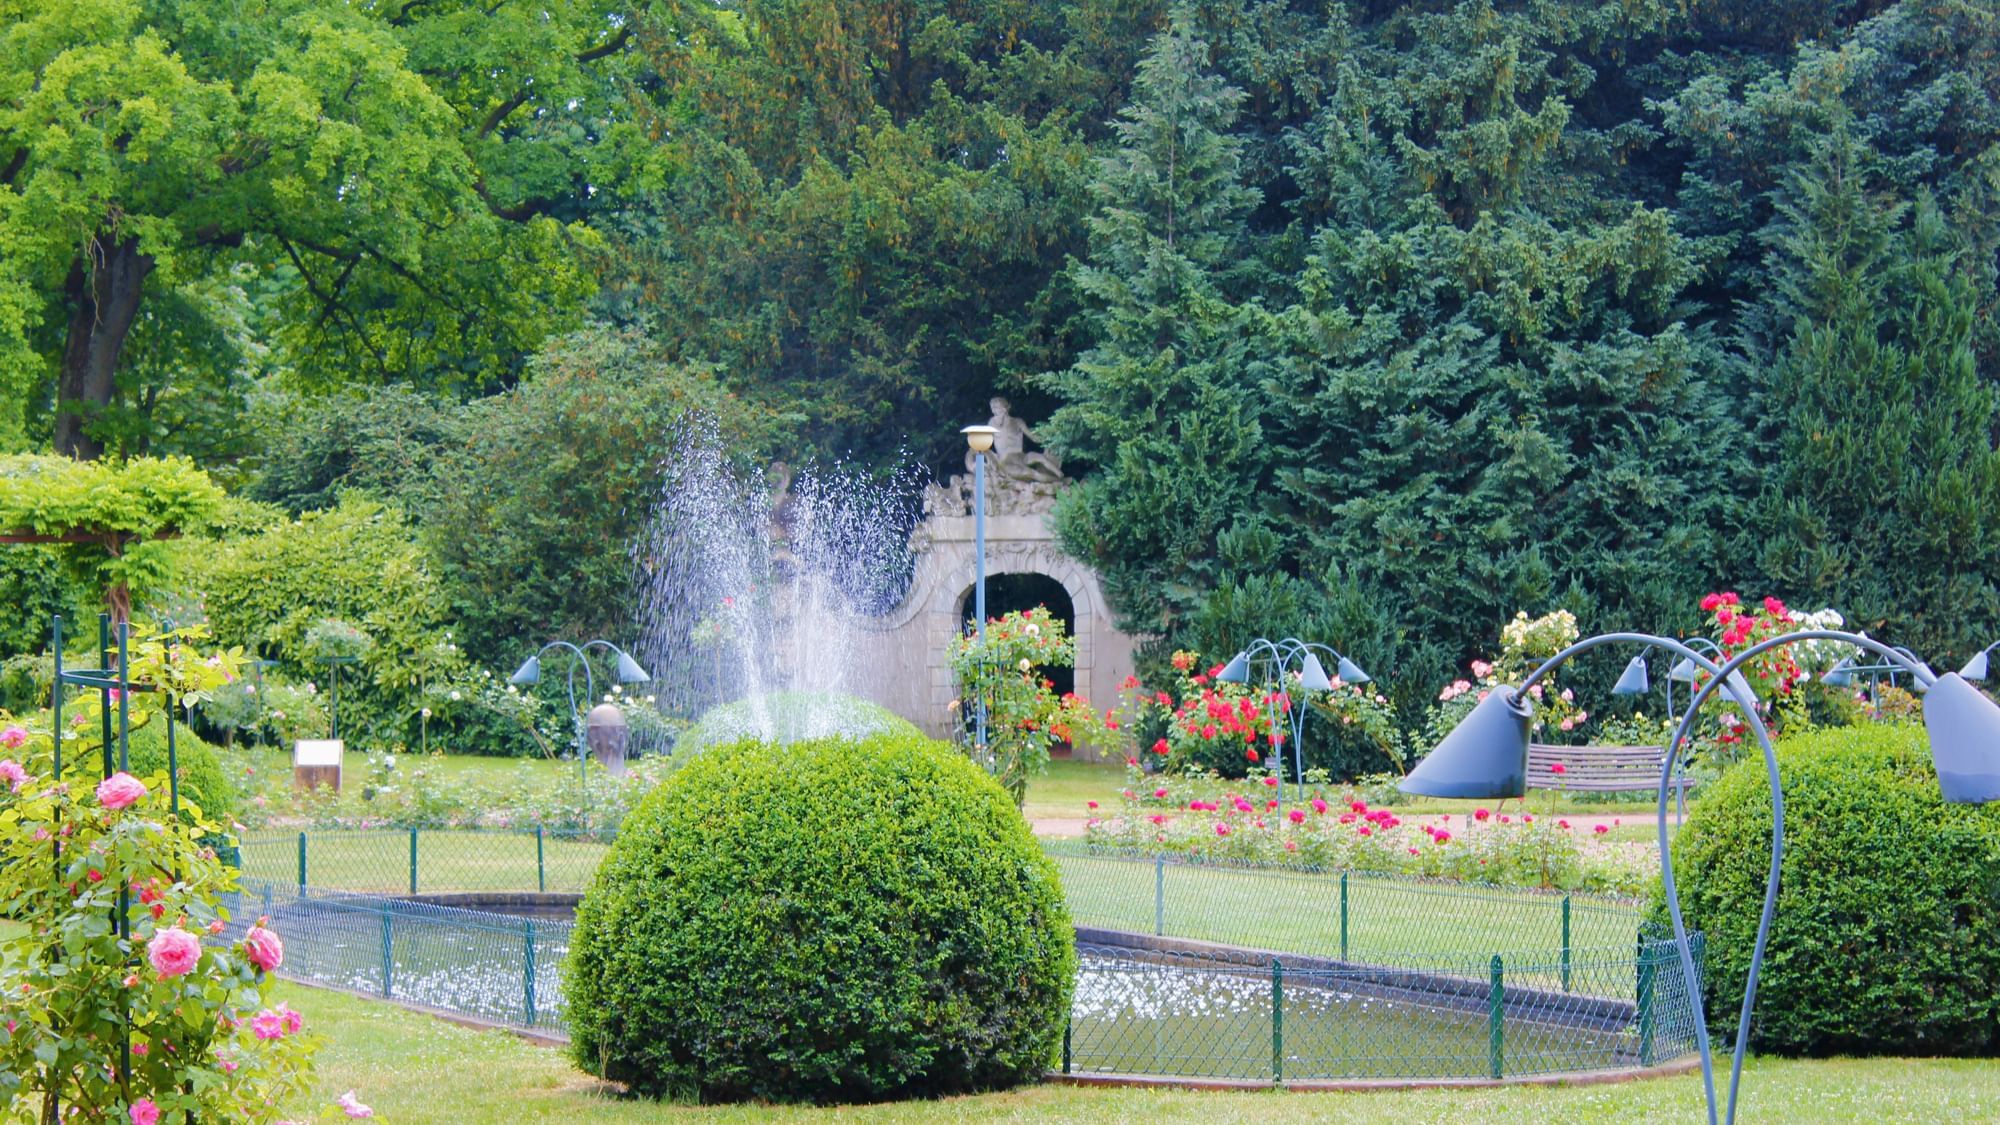 Water fountain of Pepiniere Park near The Originals Hotels